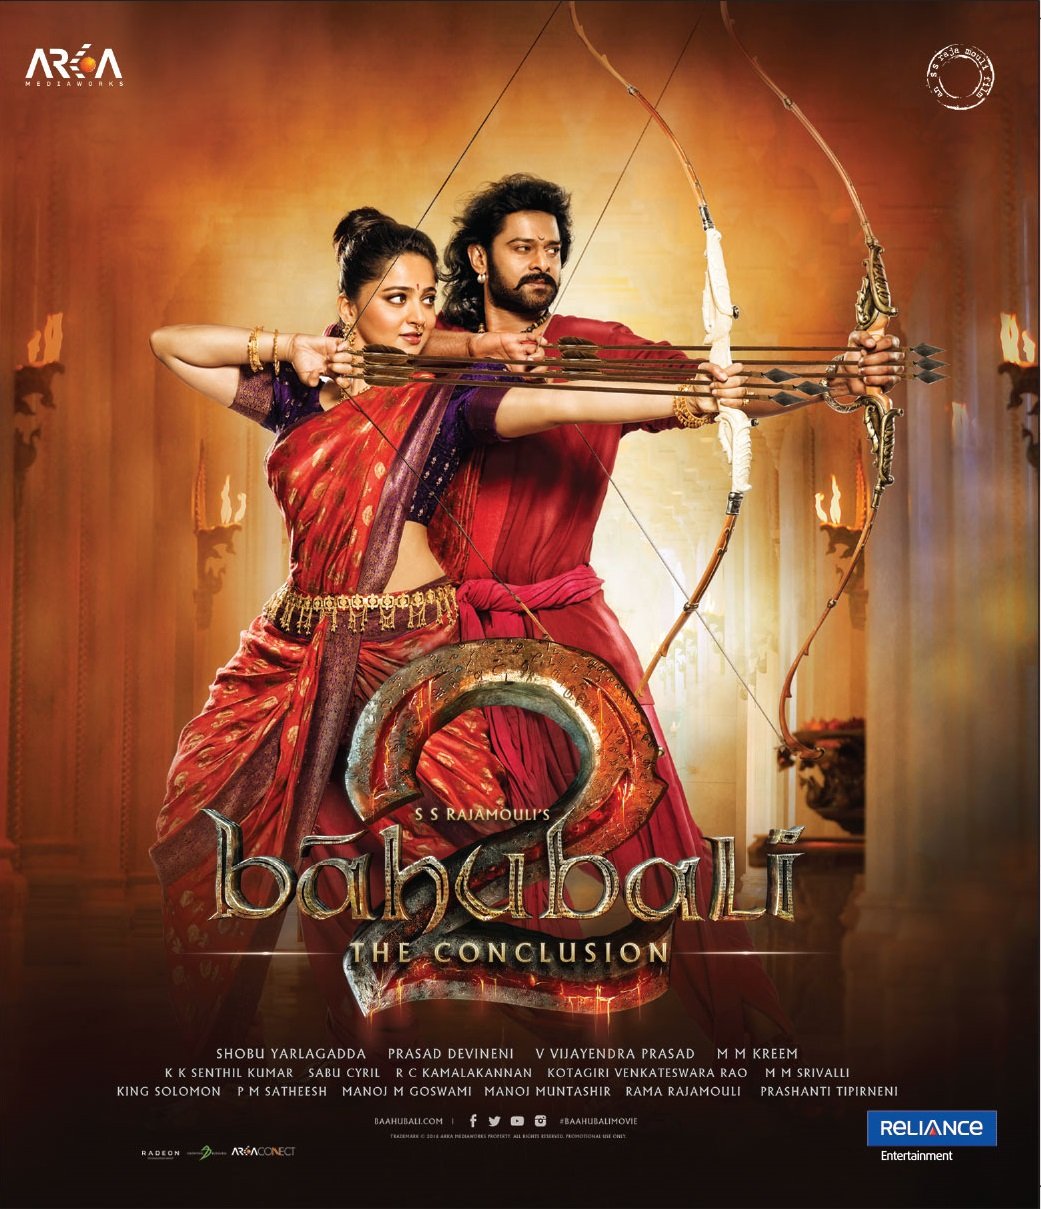 bahubali-2-the-conclusion-movie-purchase-or-watch-online